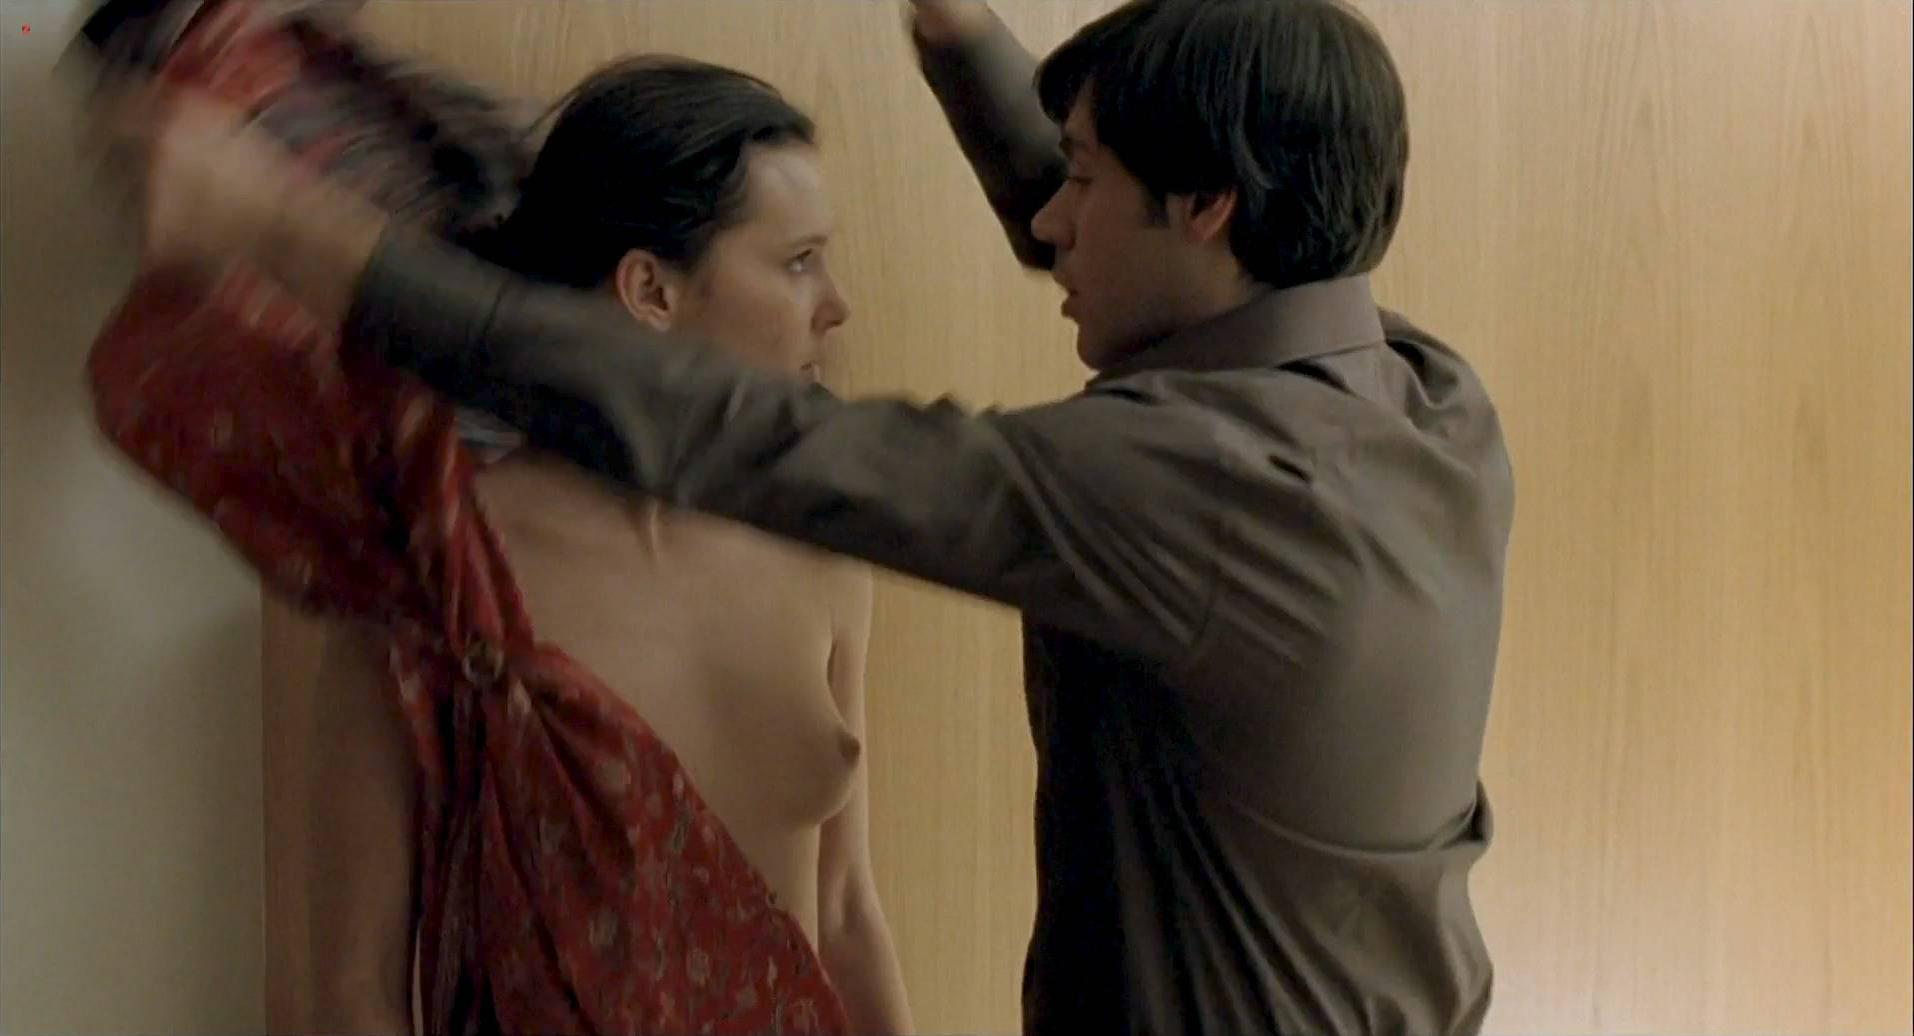 Virginie Ledoyen in nude scene from Shall We Kiss which was released in 2007. She shows us her tits.  